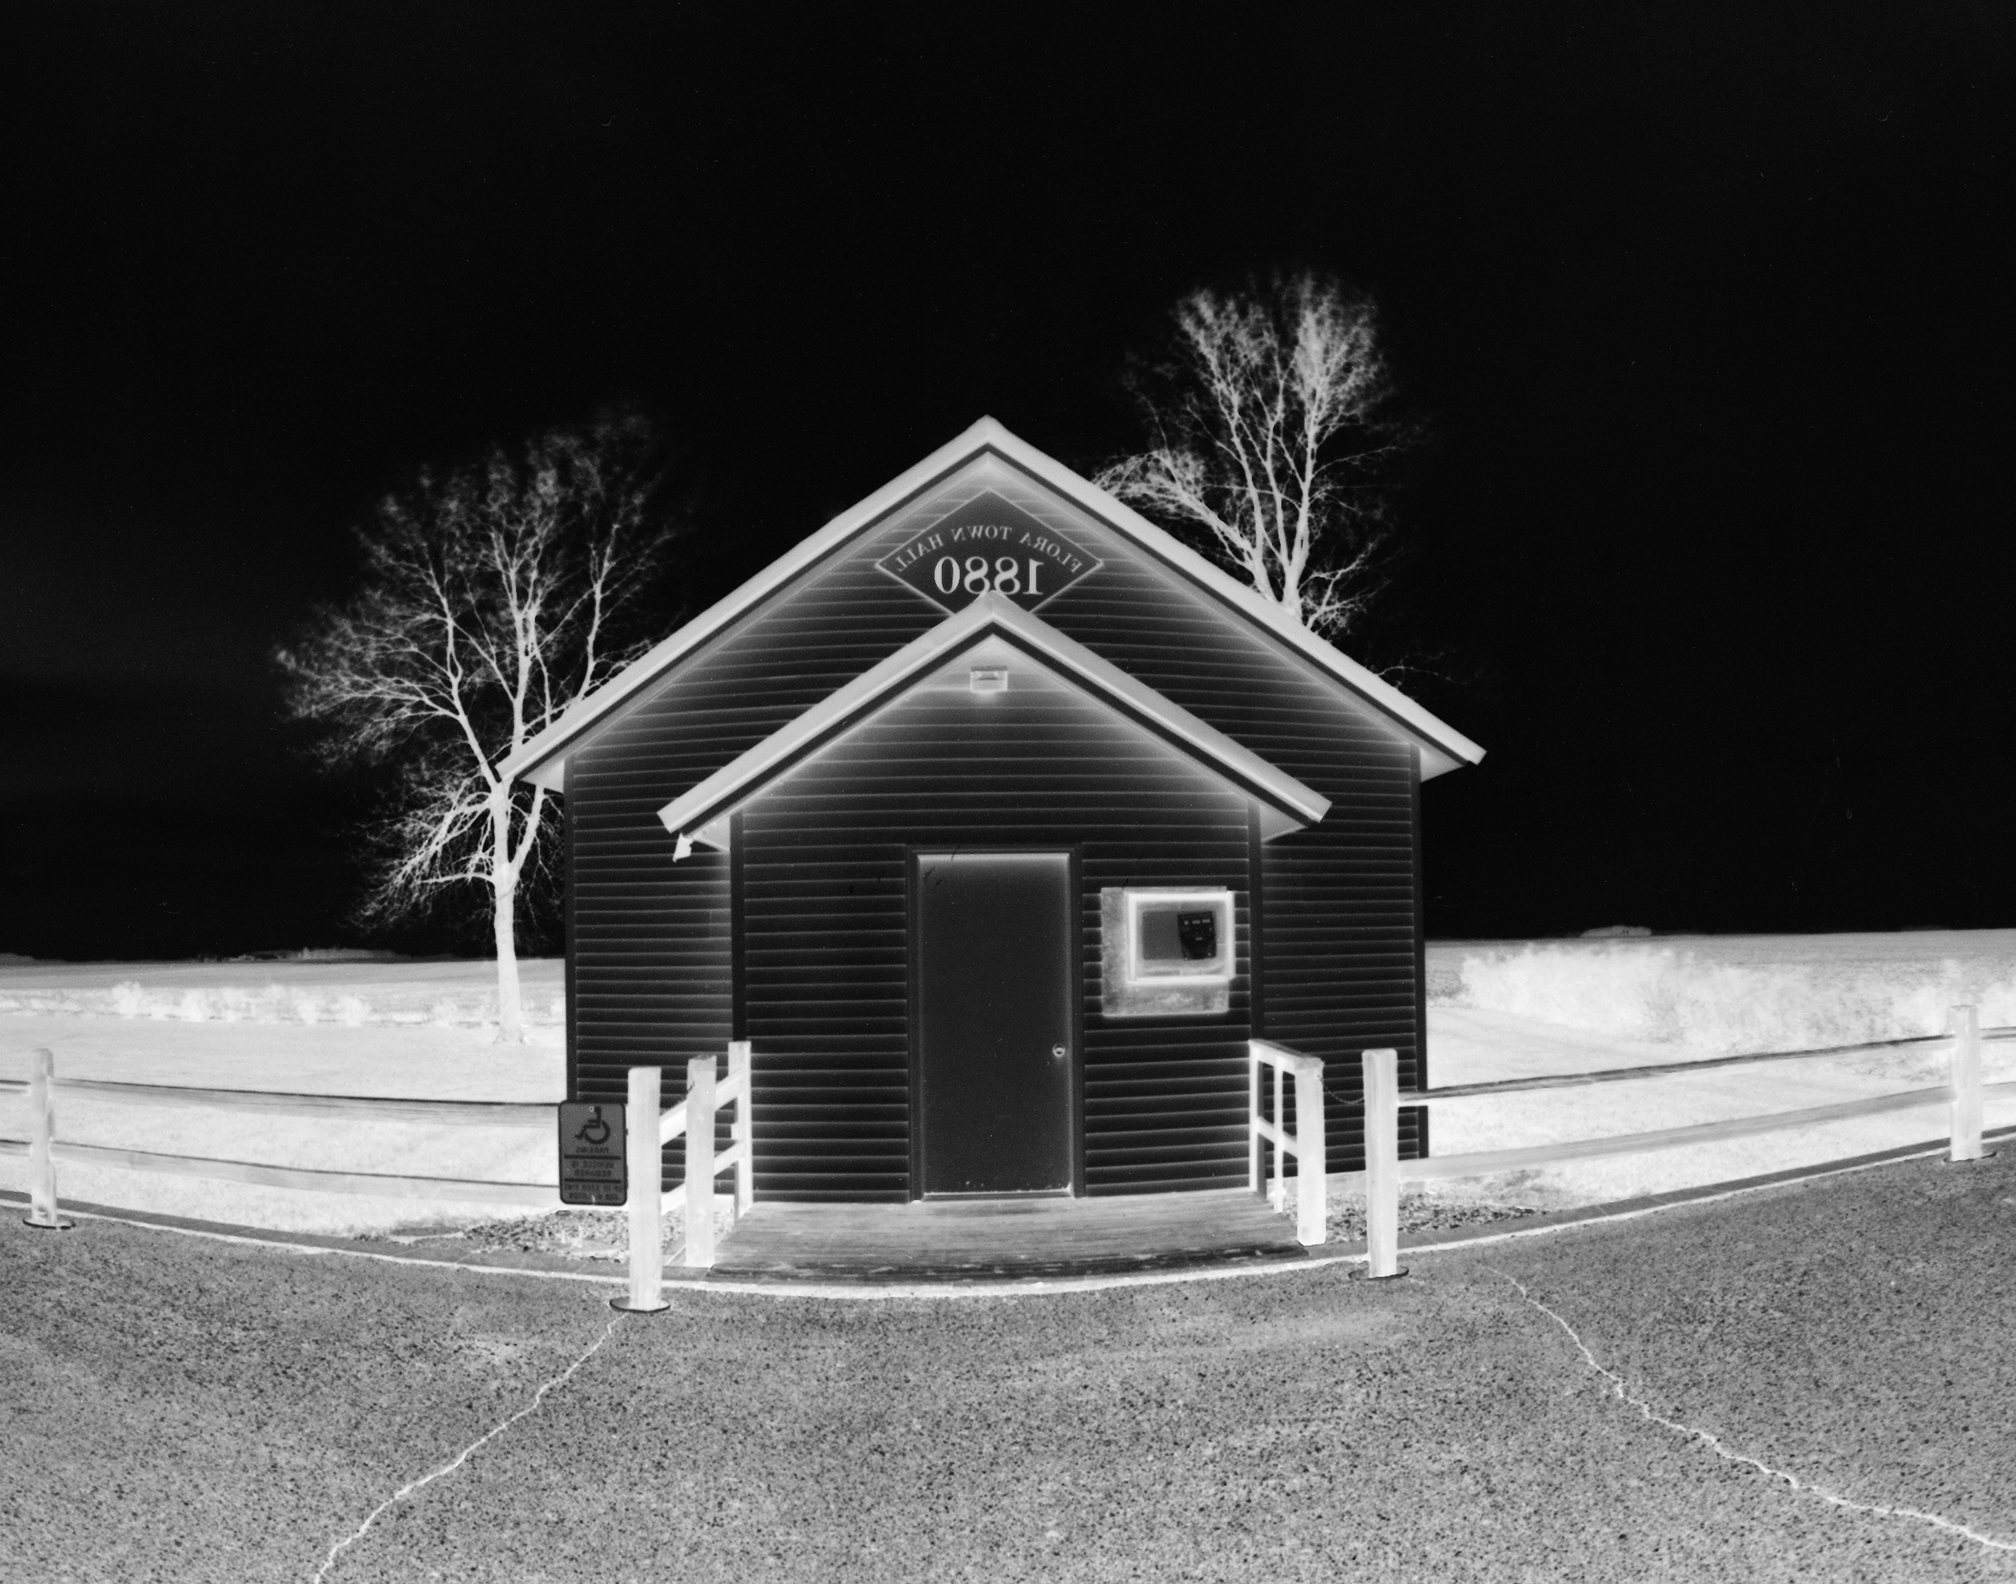 Flora - Approaching: Formal portrait of the Flora Township hall.